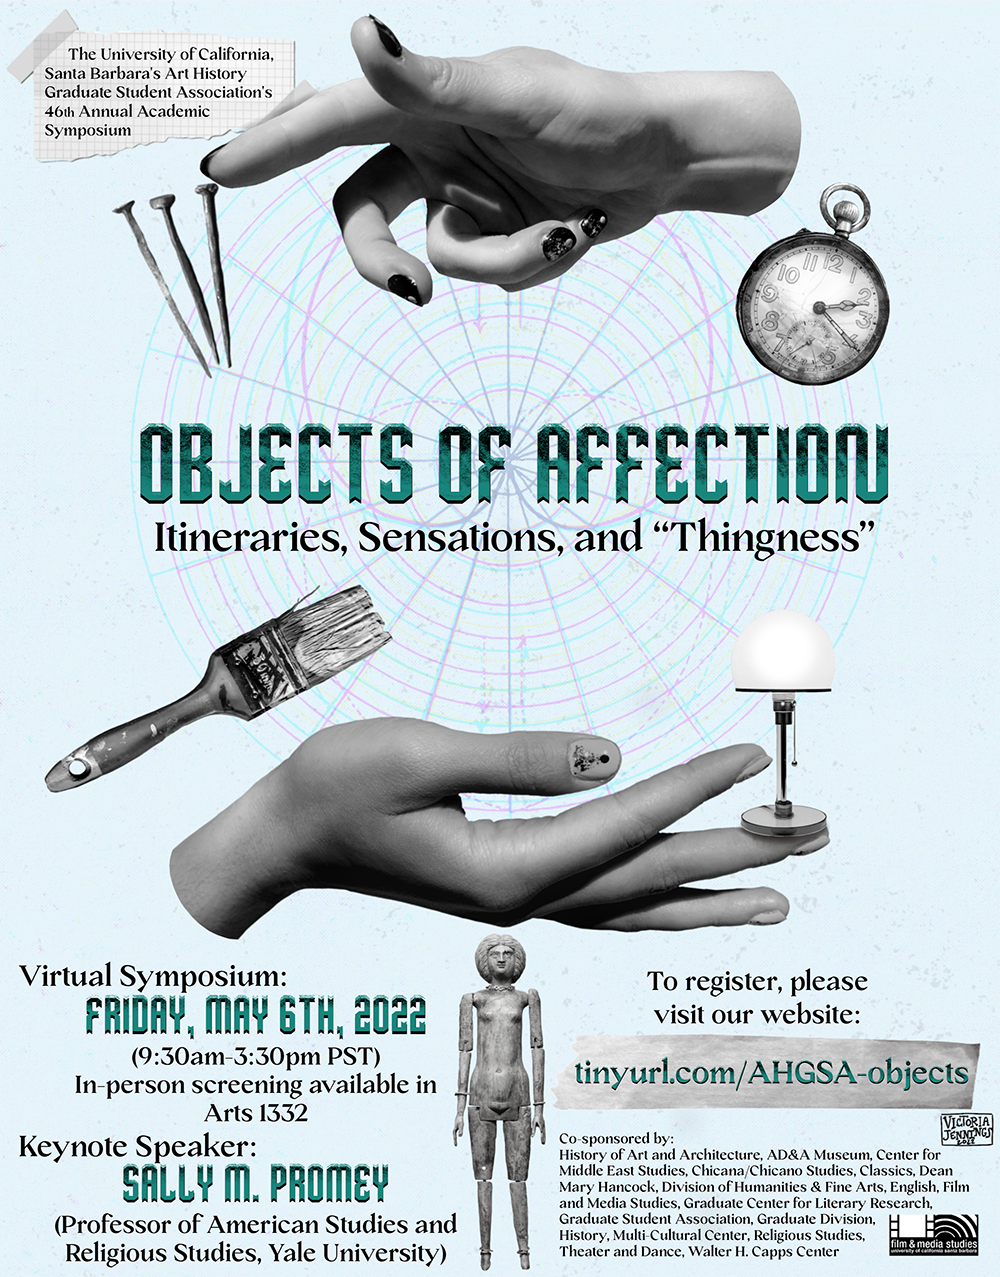 The University of California, Santa Barbara's Art History Graduate Student Association's 46th Annual Graduate Student Symposium: Objects of Affection: Itineraries, Sensations, and “Thingness”